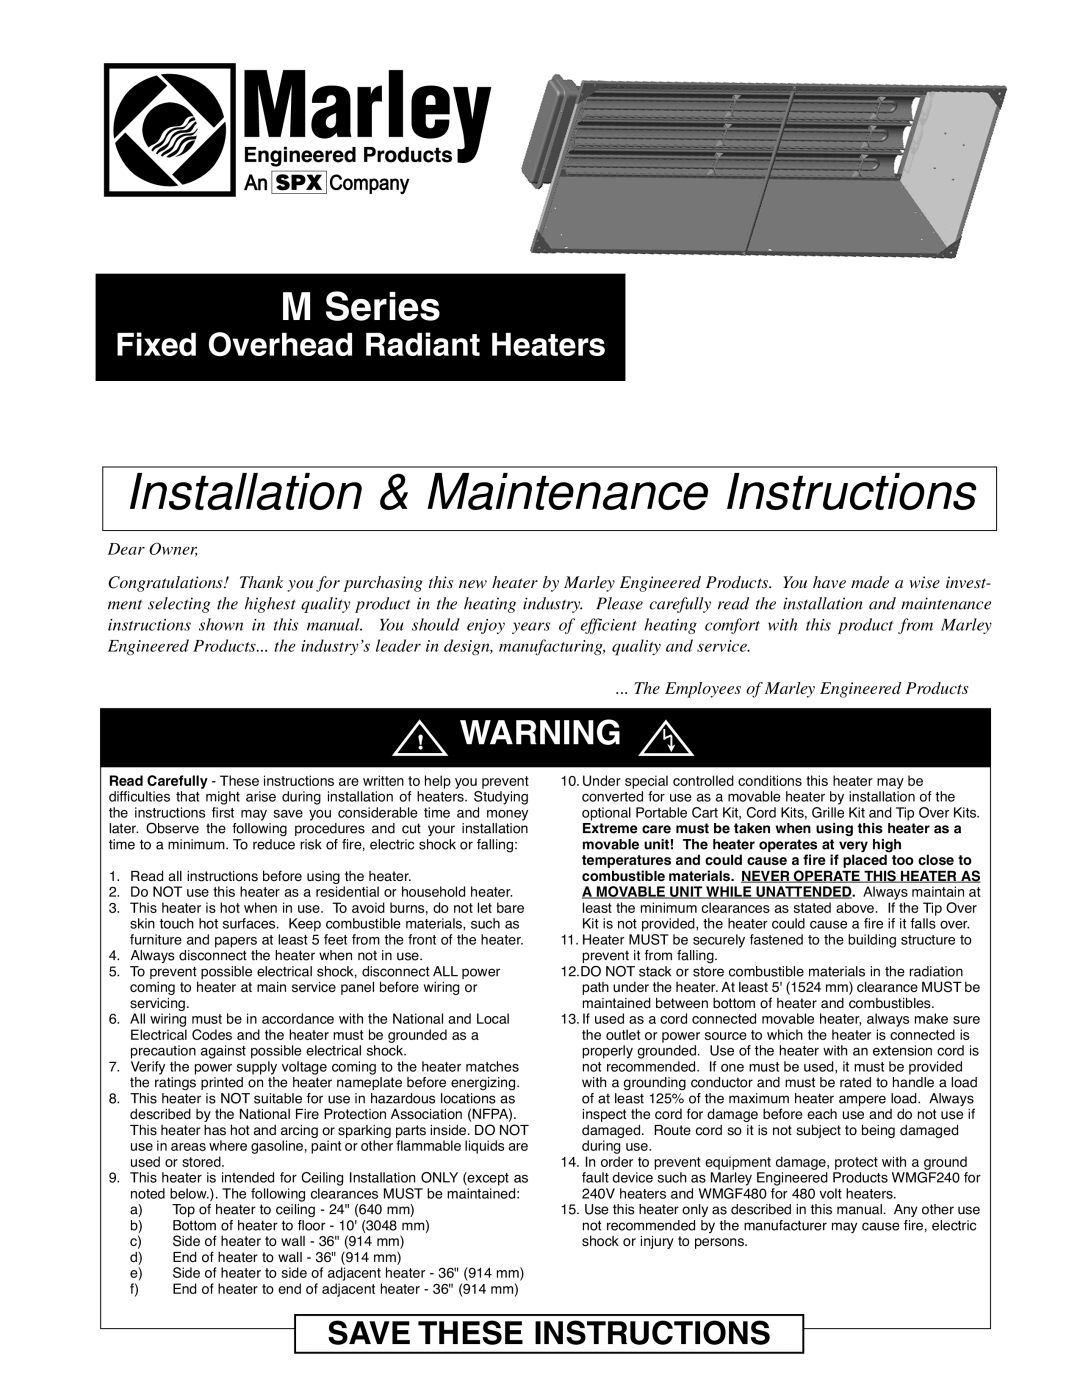 Marley Engineered Products M Series manual Installation & Maintenance Instructions, Fixed Overhead Radiant Heaters 